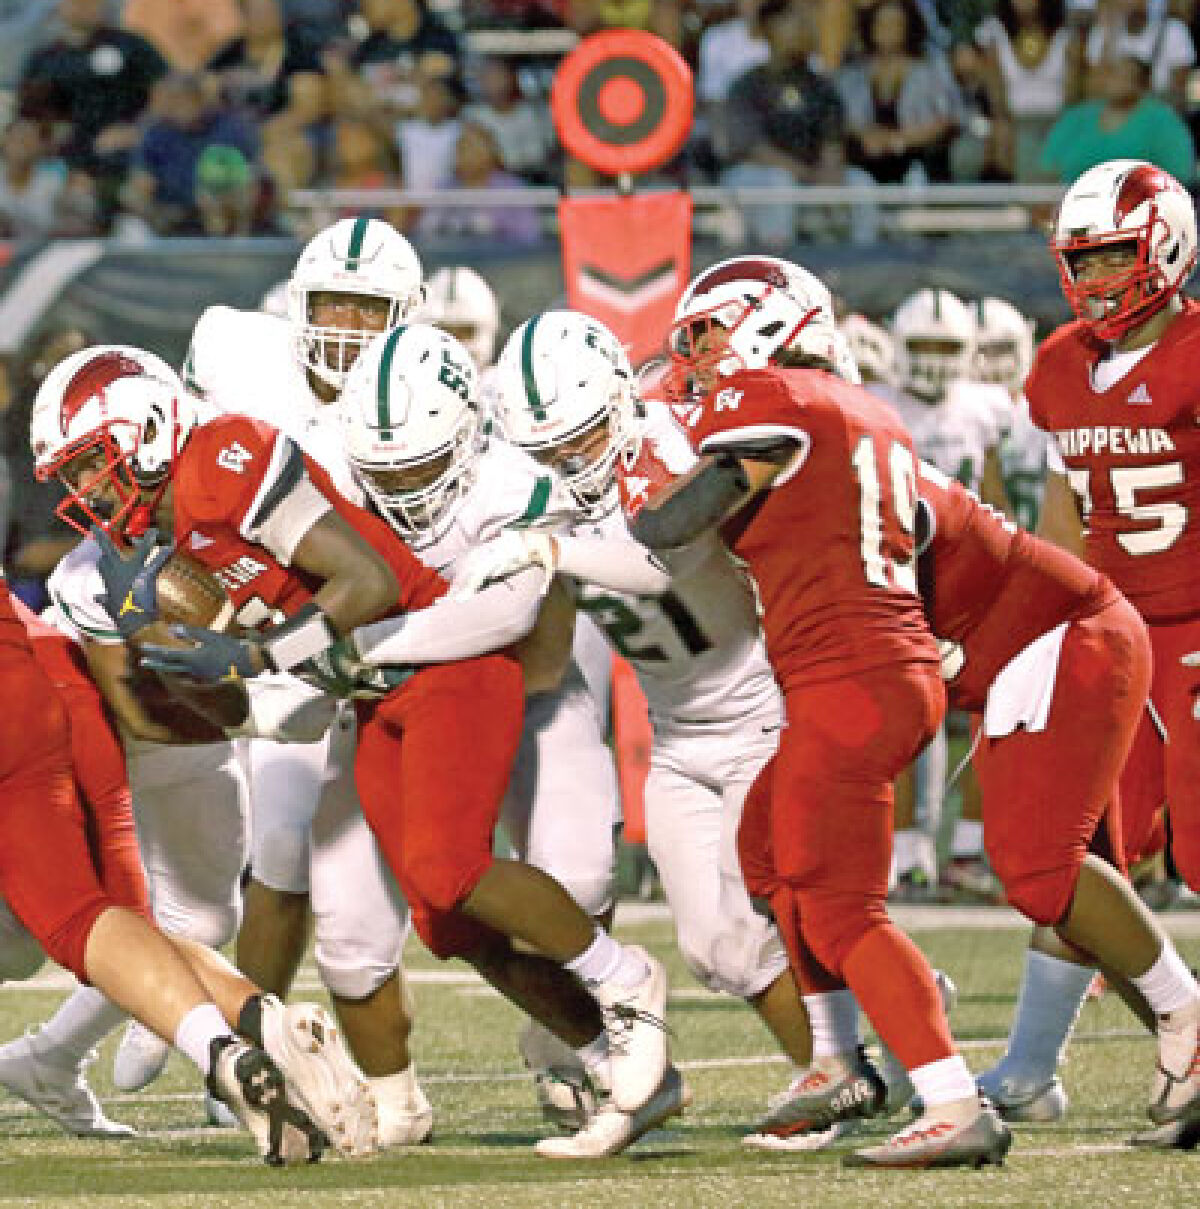  West Bloomfield’s defense teams up to make the tackle on a Chippewa Valley ball carrier. 